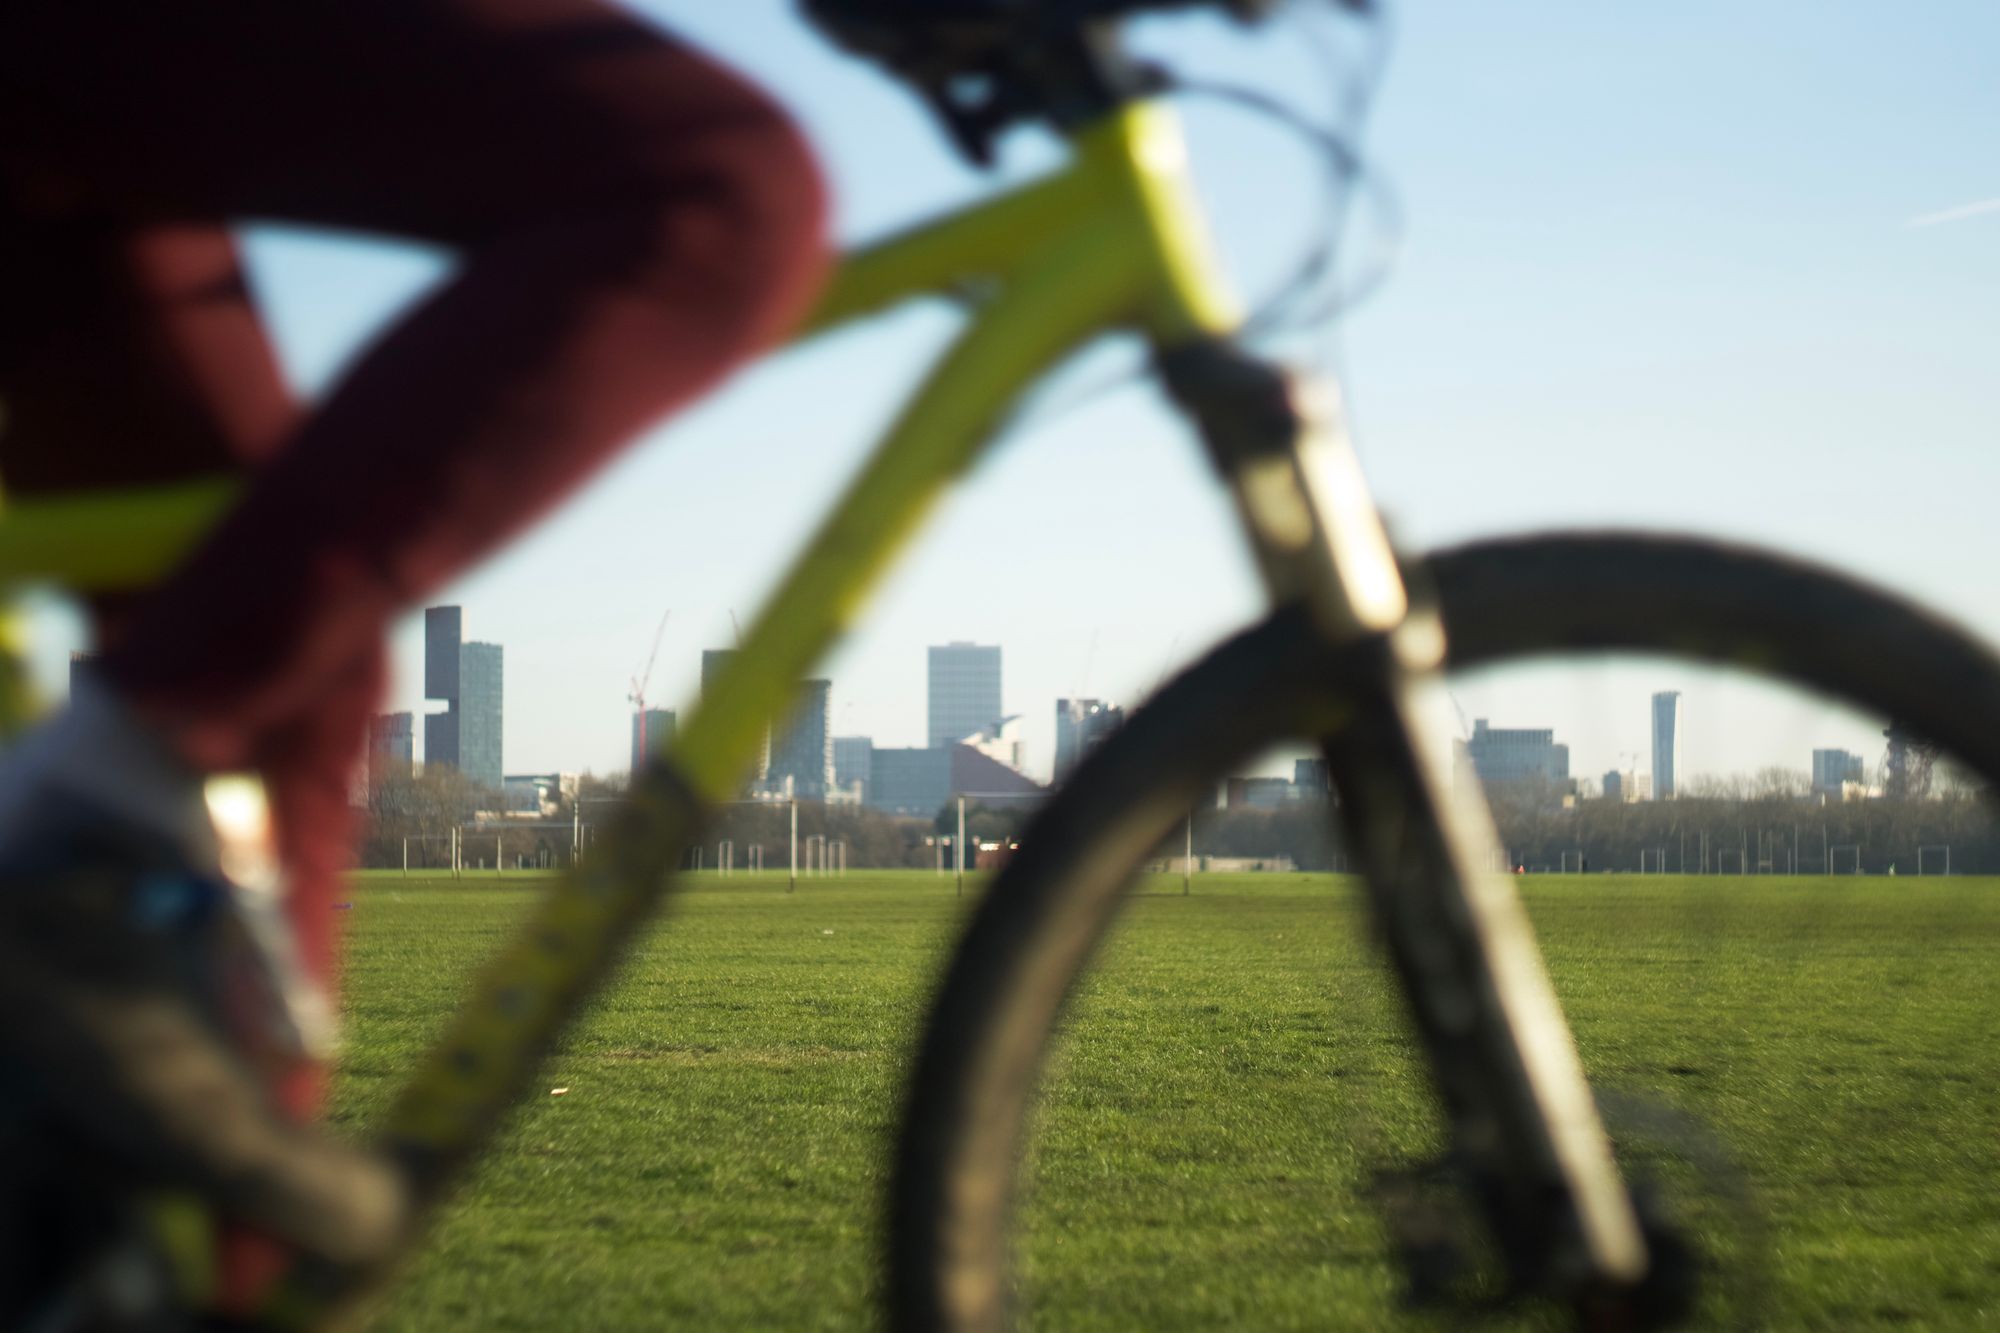 A shot over a green field towards a skyline on a sunny day. In the foreground, a person with red trousers on a neon-green mountain bike crosses the frame.